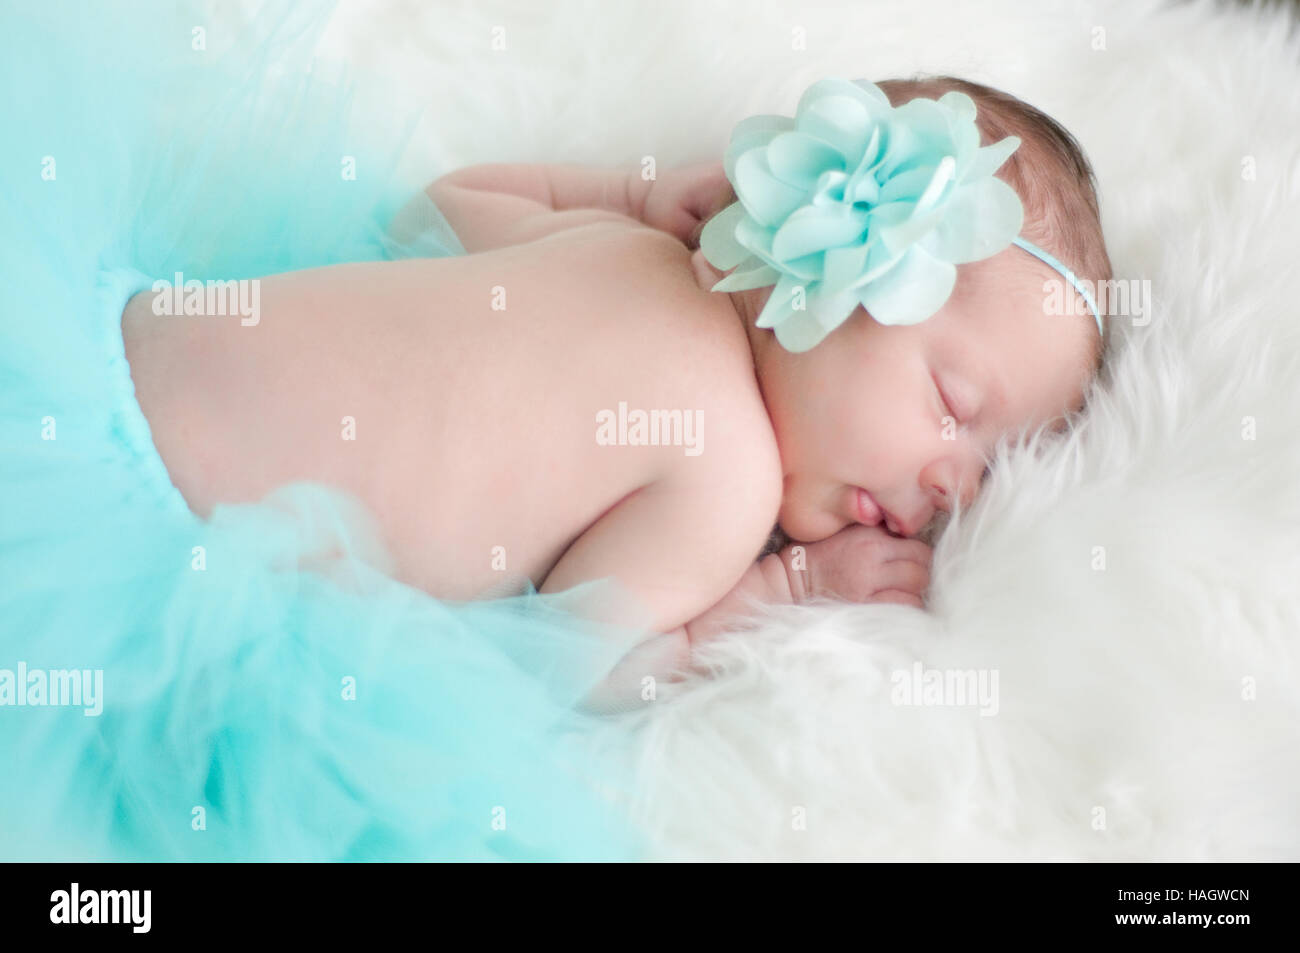 Precious baby girl sleeping in teal outfit laying on white fur. Stock Photo